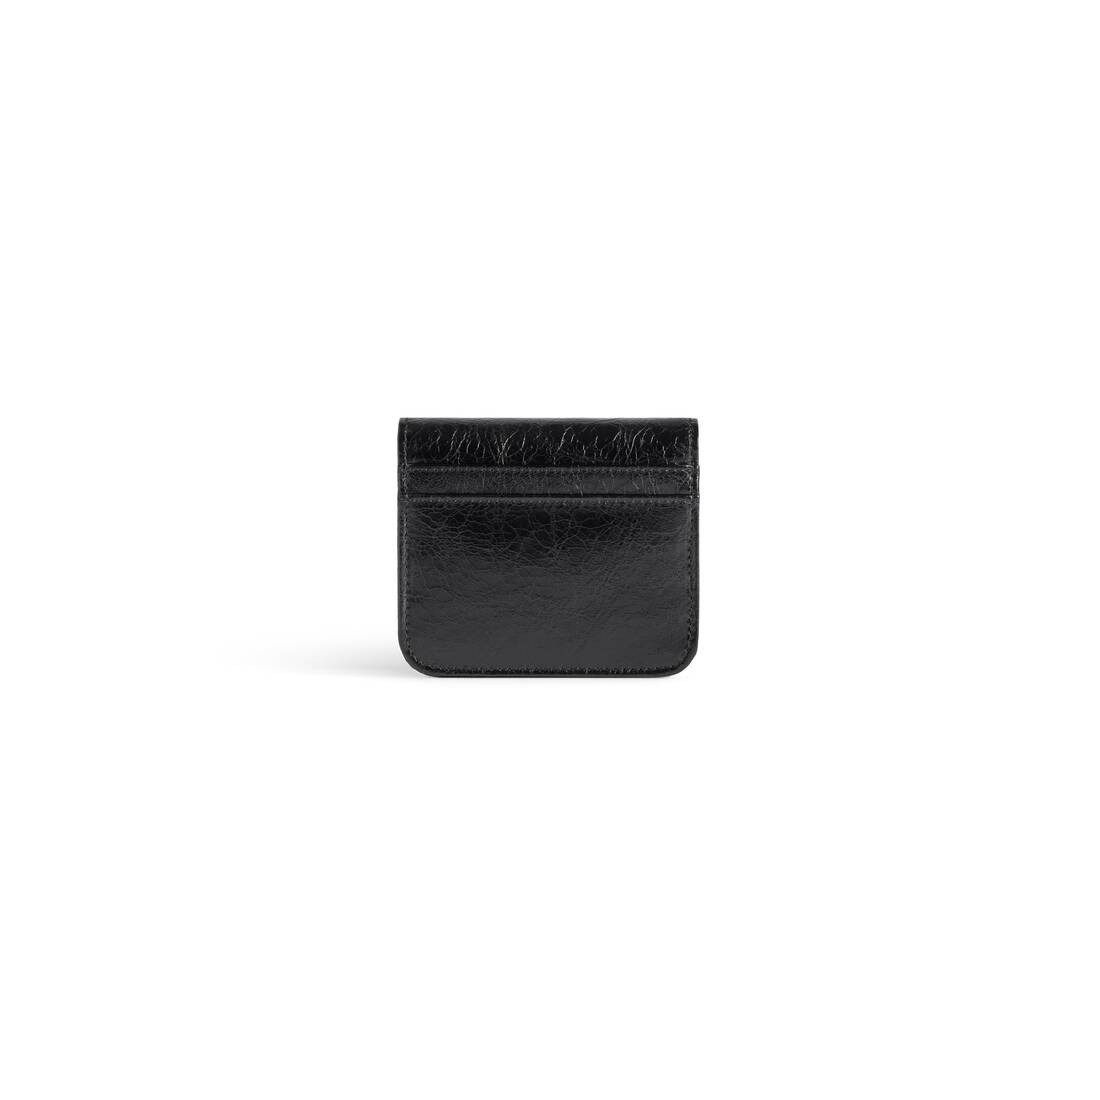 Women's Monaco Flap Coin And Card Holder in Black - 2